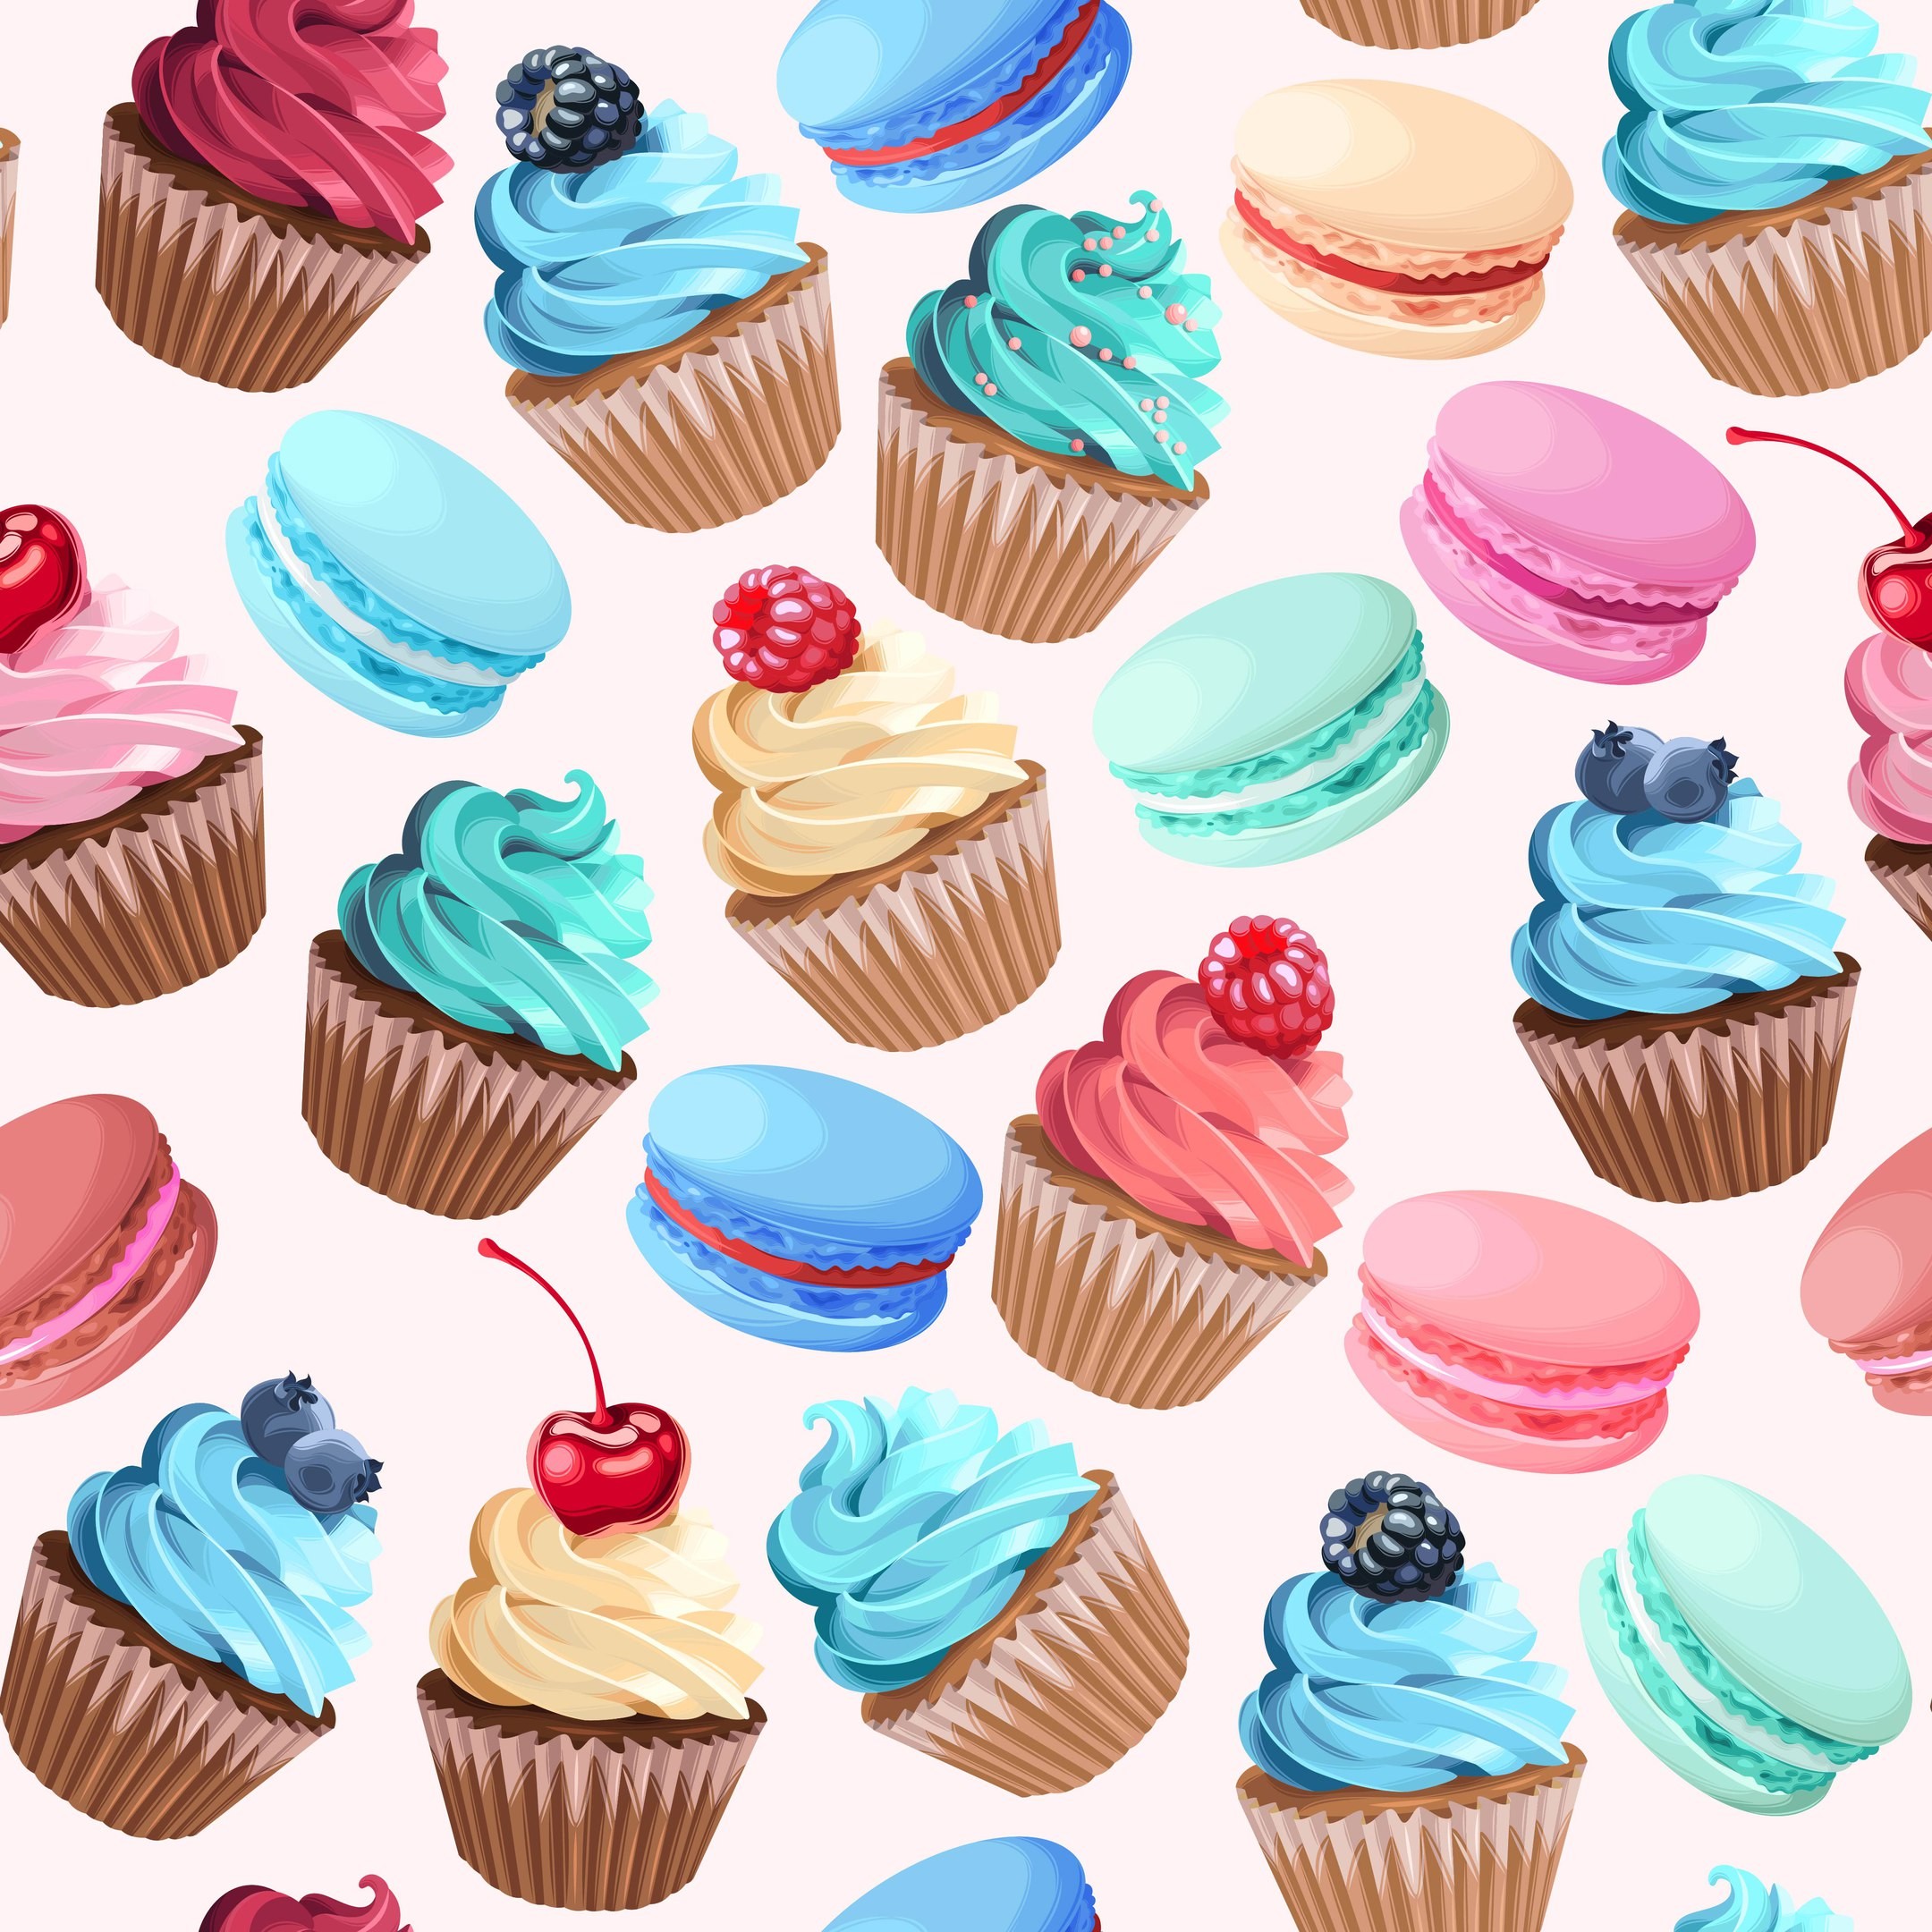 Background, Illustration, Pattern, Cute, Art, Food, - Cupcakes Background - HD Wallpaper 